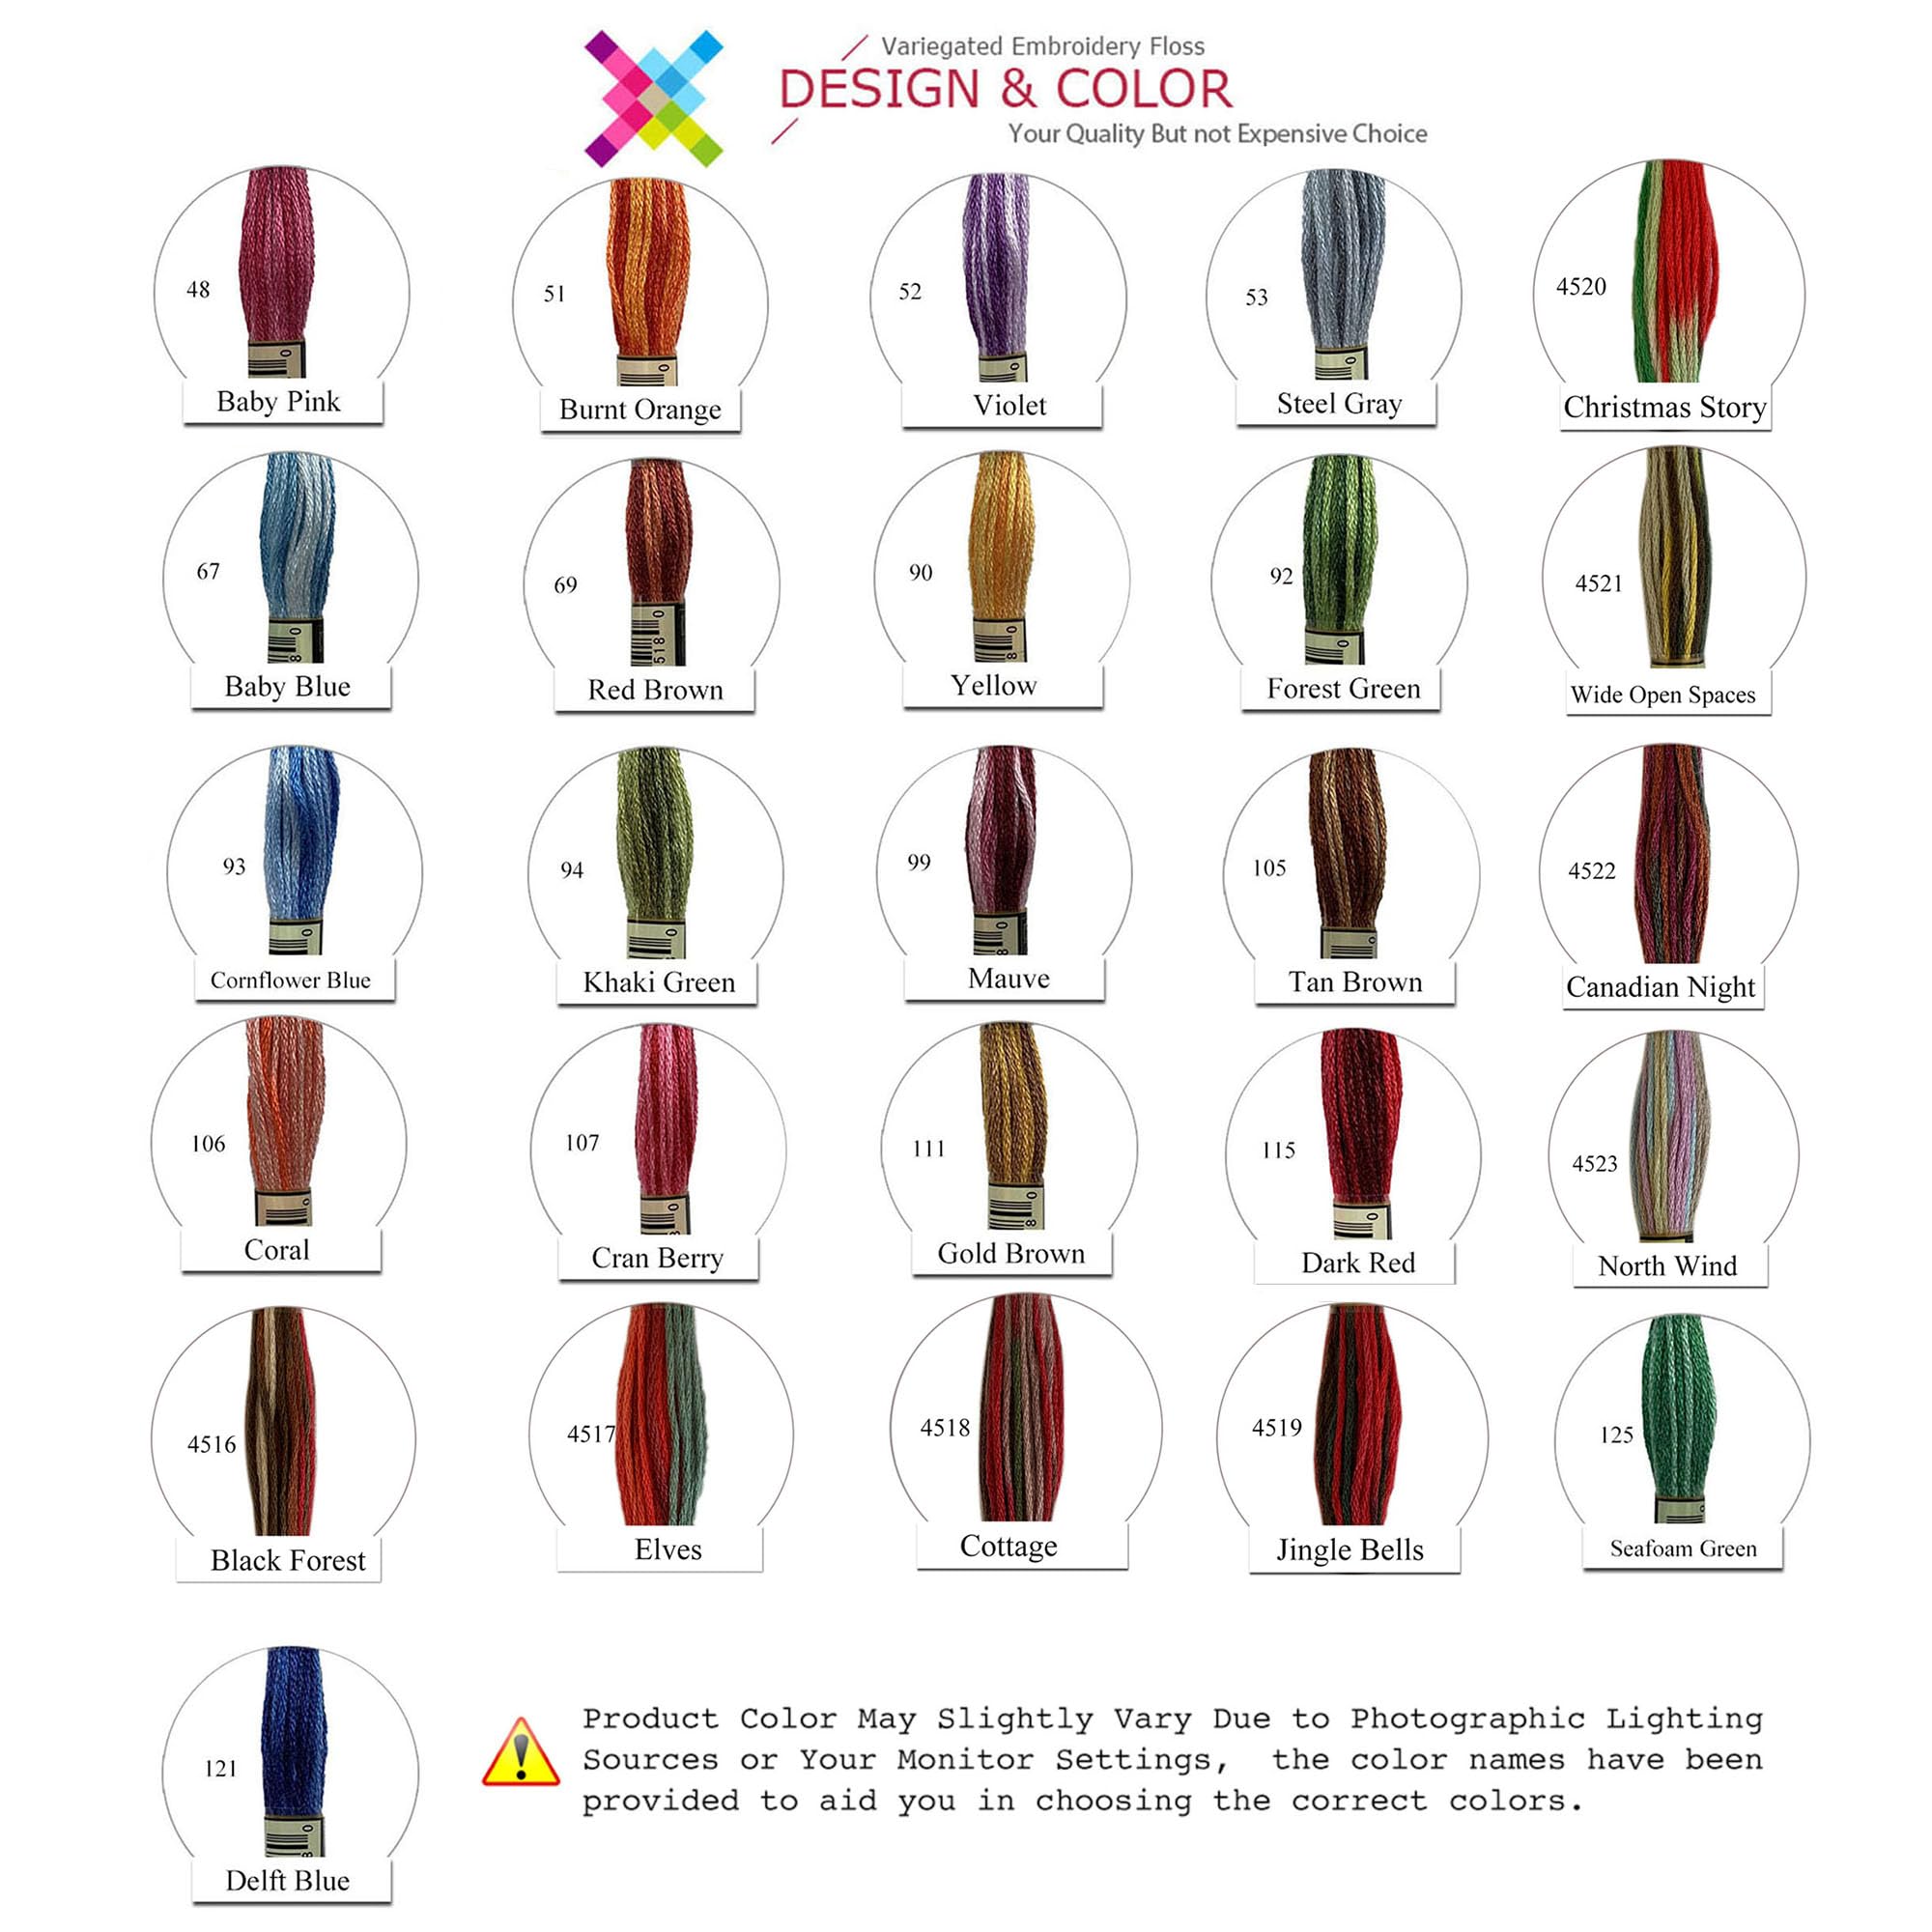 26 Gorgeous Color Variations Floss Variegated Cross Stitch Threads, Set C